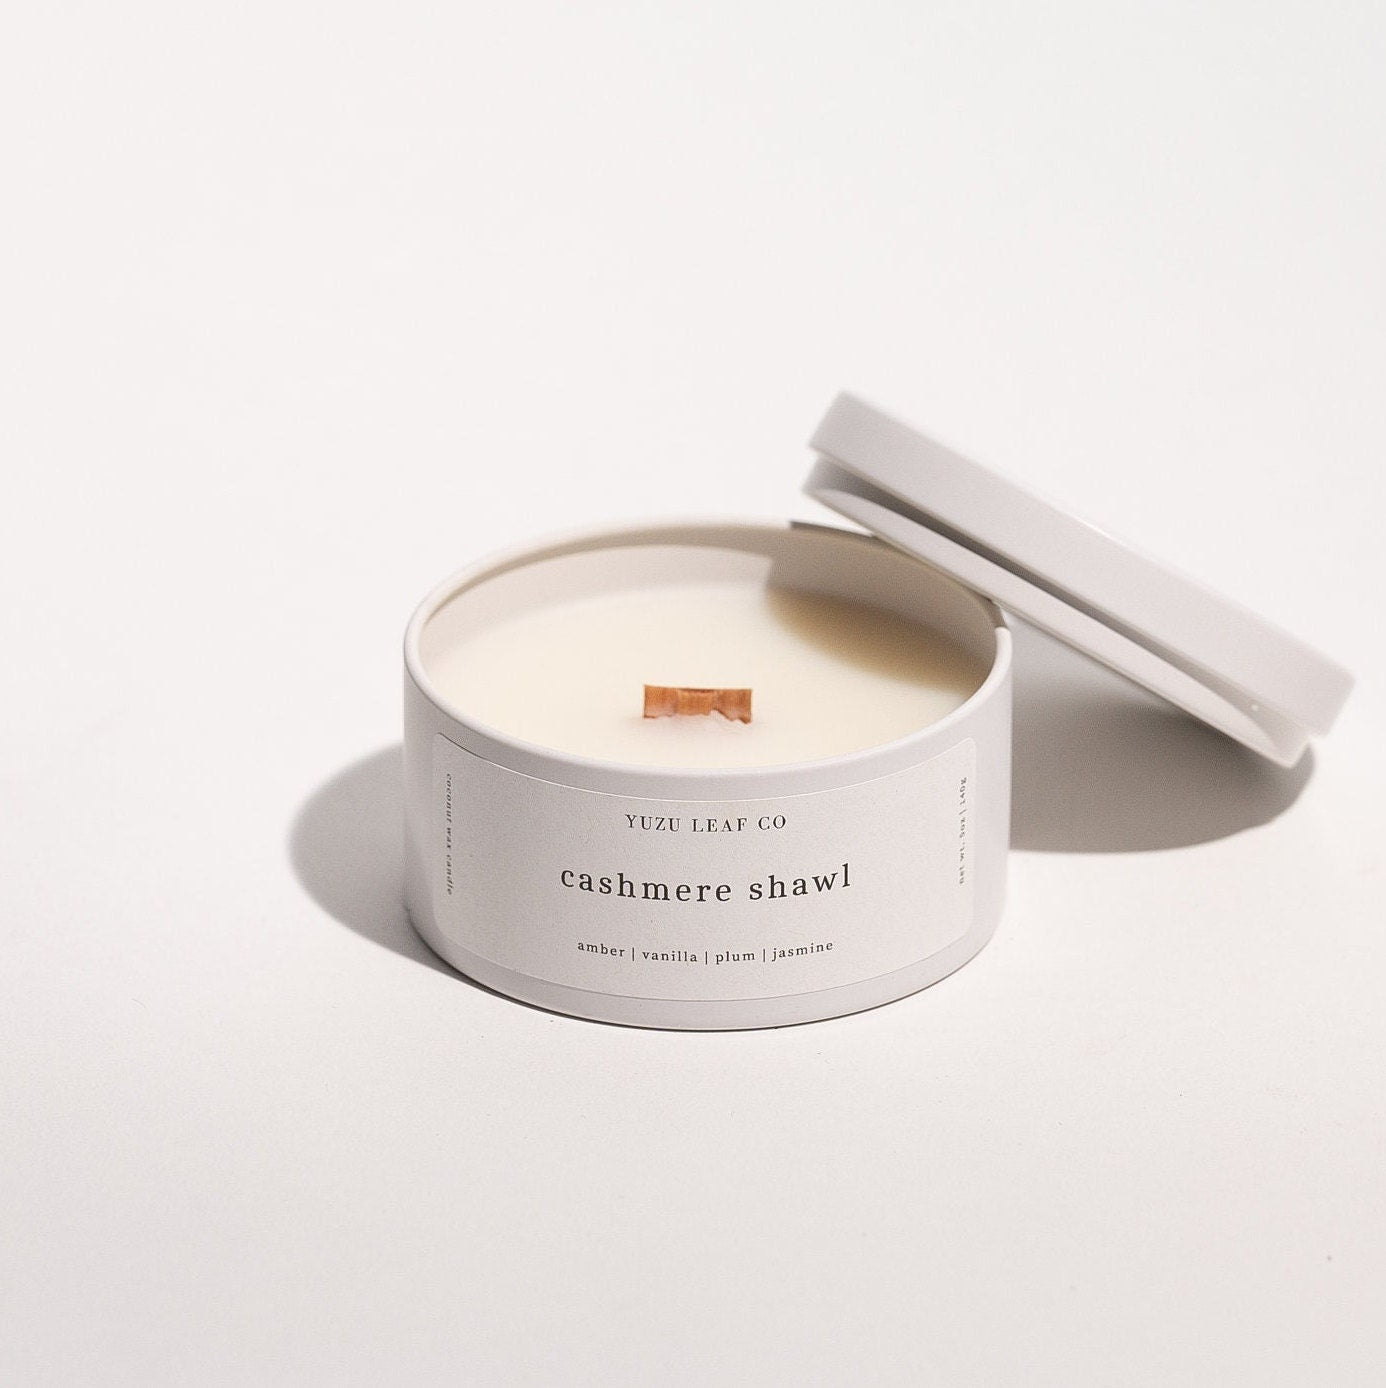 There is a candle tin that is about the size of a circular ice cream sandwich or small burger. The lid is off and leaning against the side to display the wooden wick in the middle. The candle is named "cashmere shawl" with notes of amber, vanilla, plum, and jasmine.